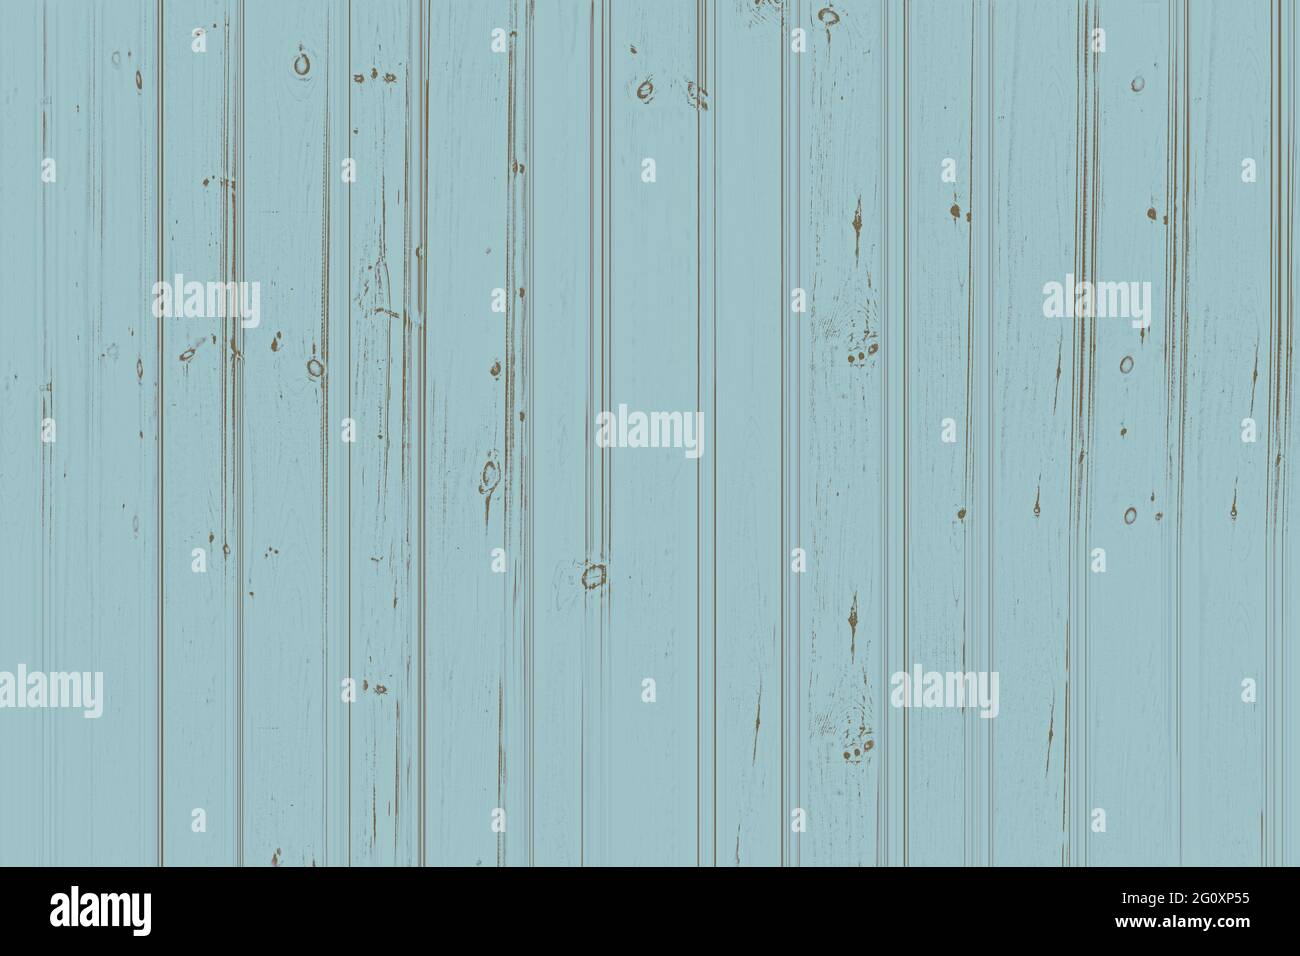 Wood paneling tongue and groove style wall background texture with blue and turquoise wood grain and knots Stock Photo